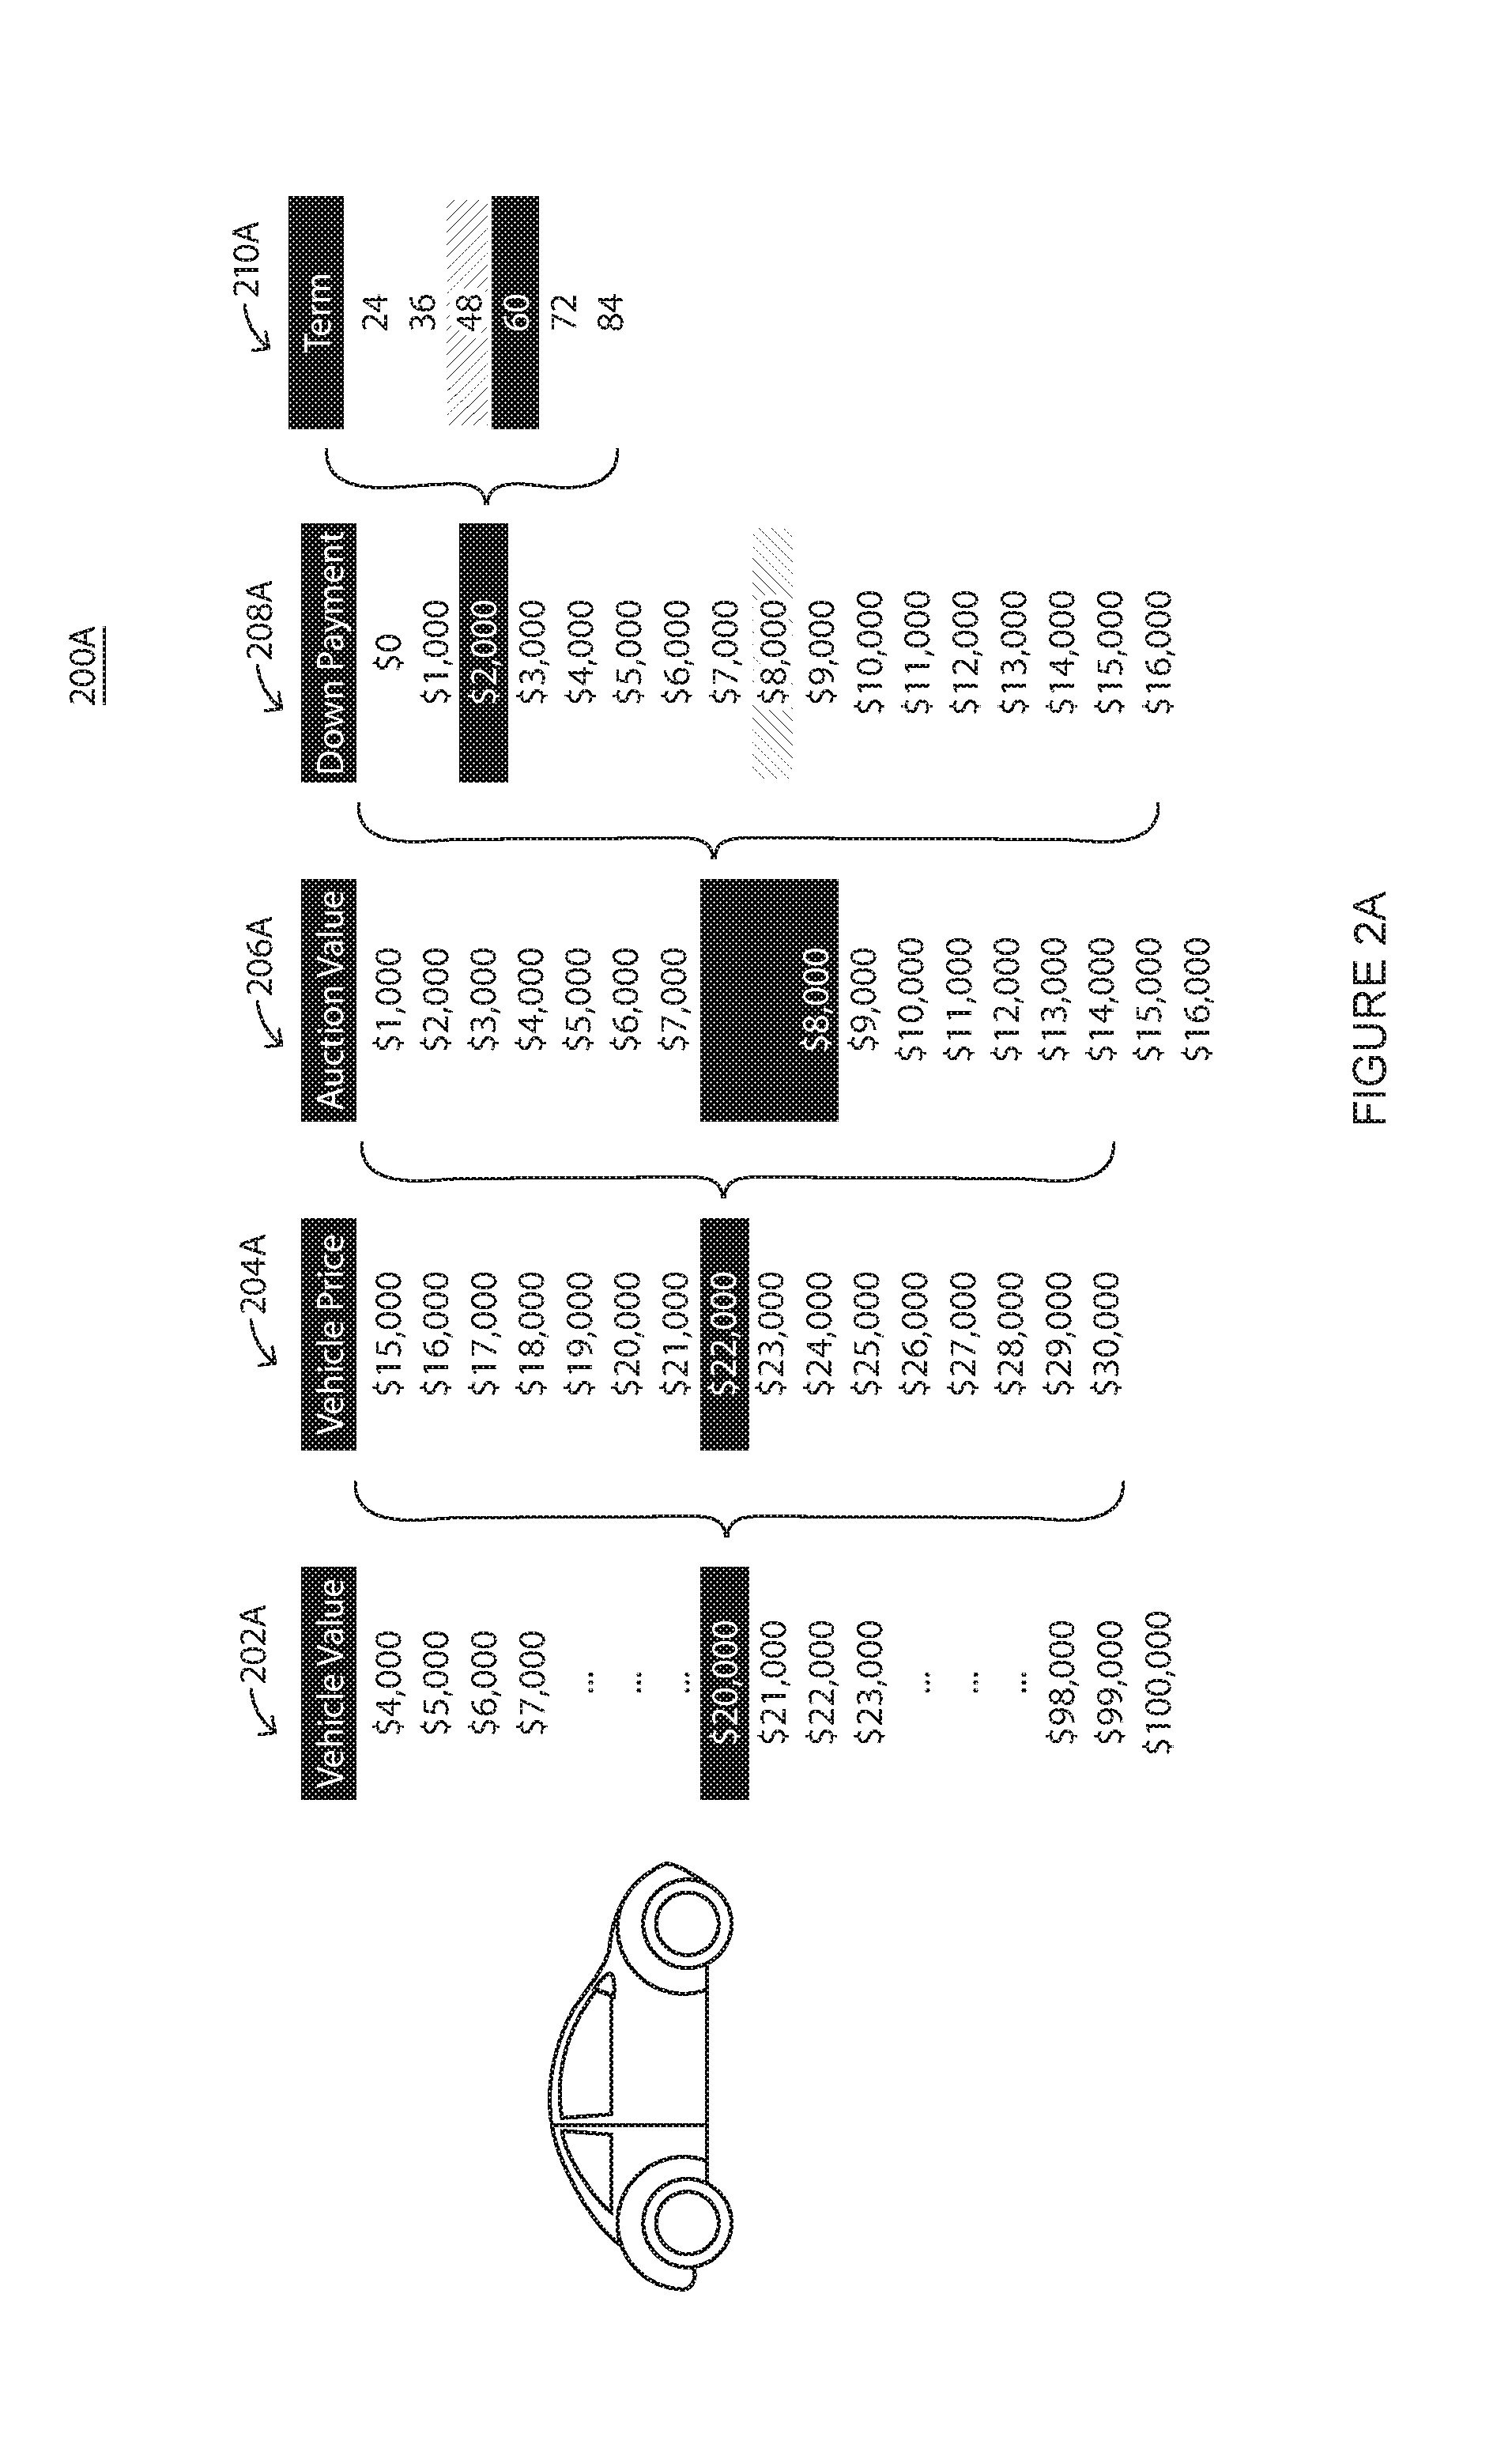 System and method for simultaneous multi-option loan pricing and adjudication for automobiles